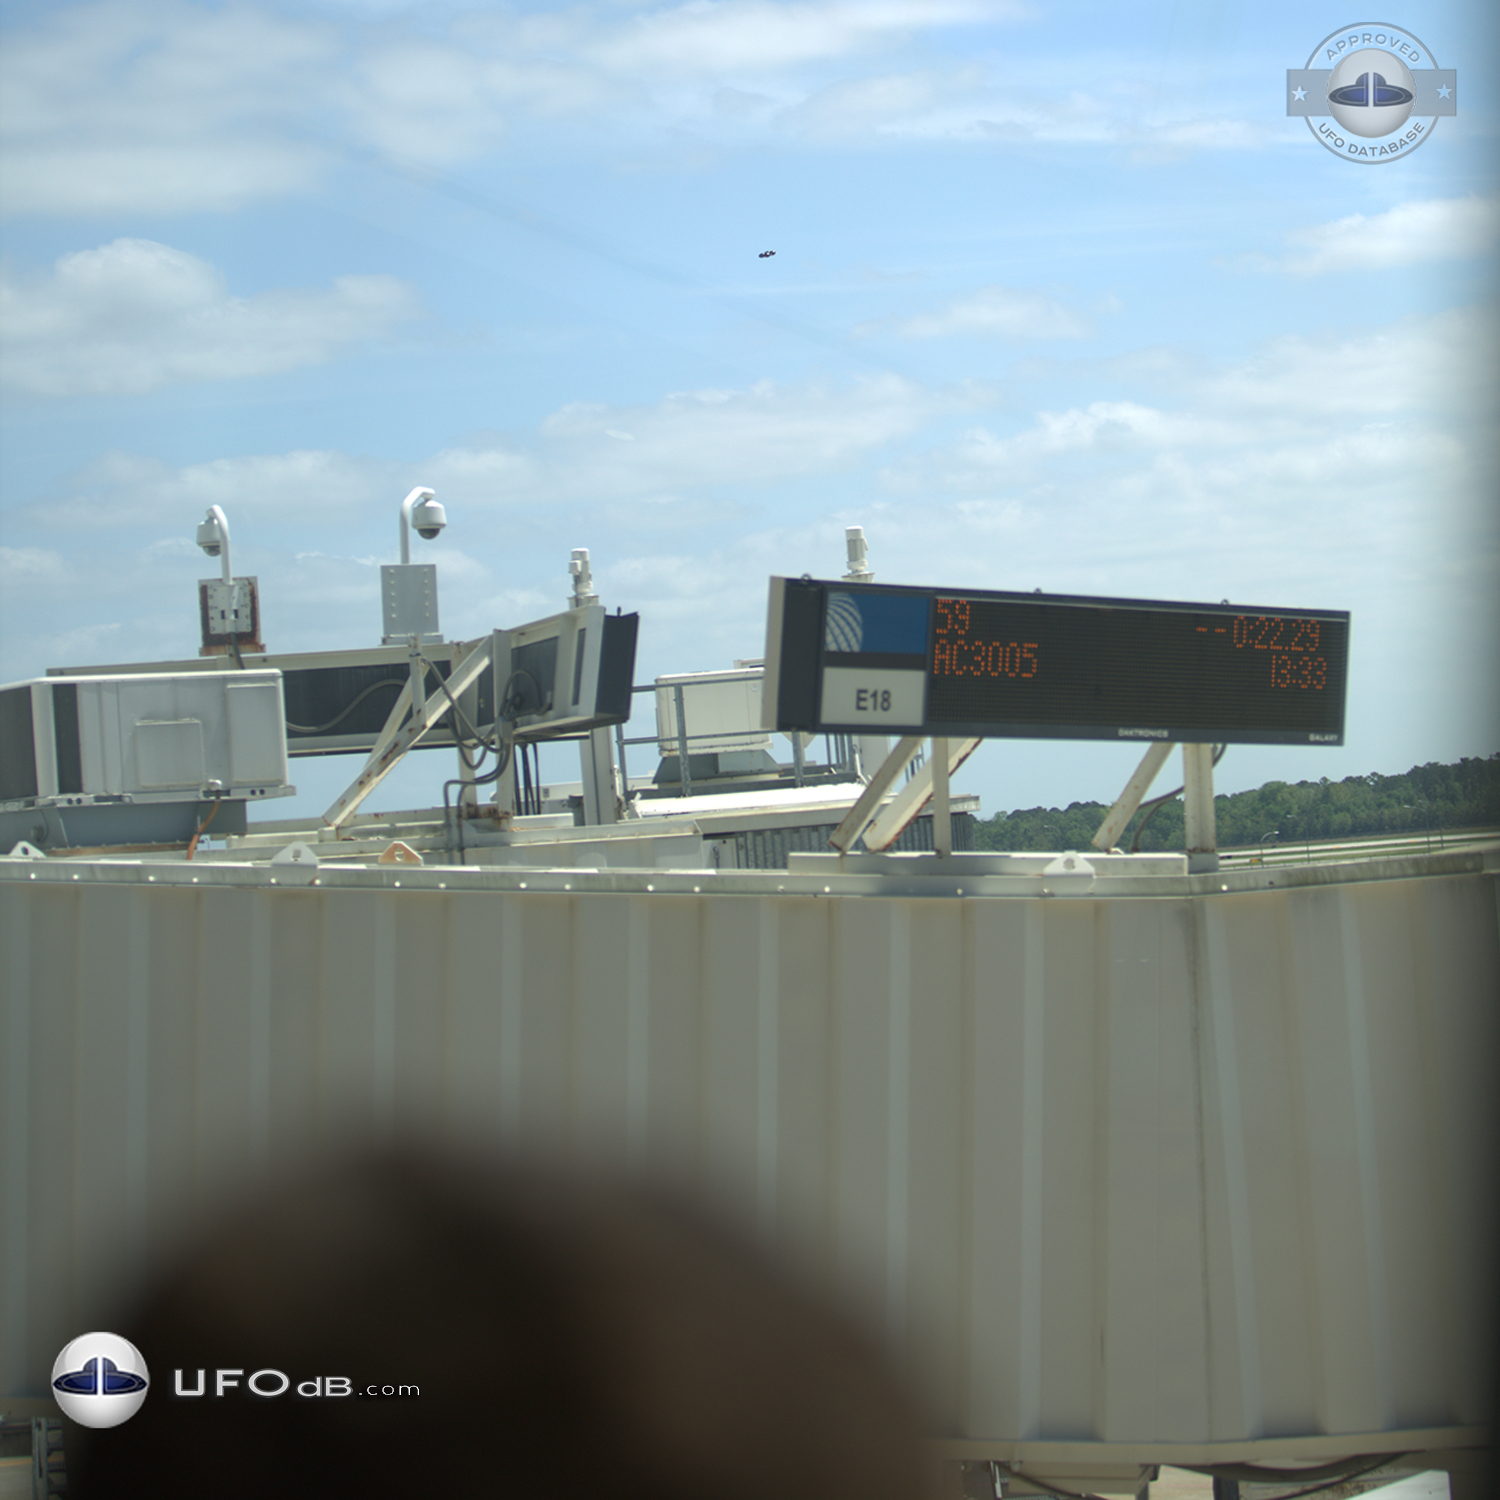 UFO with 4 Spheres over Austin Bergstrom Airport in Texas USA 2014 UFO Picture #670-1